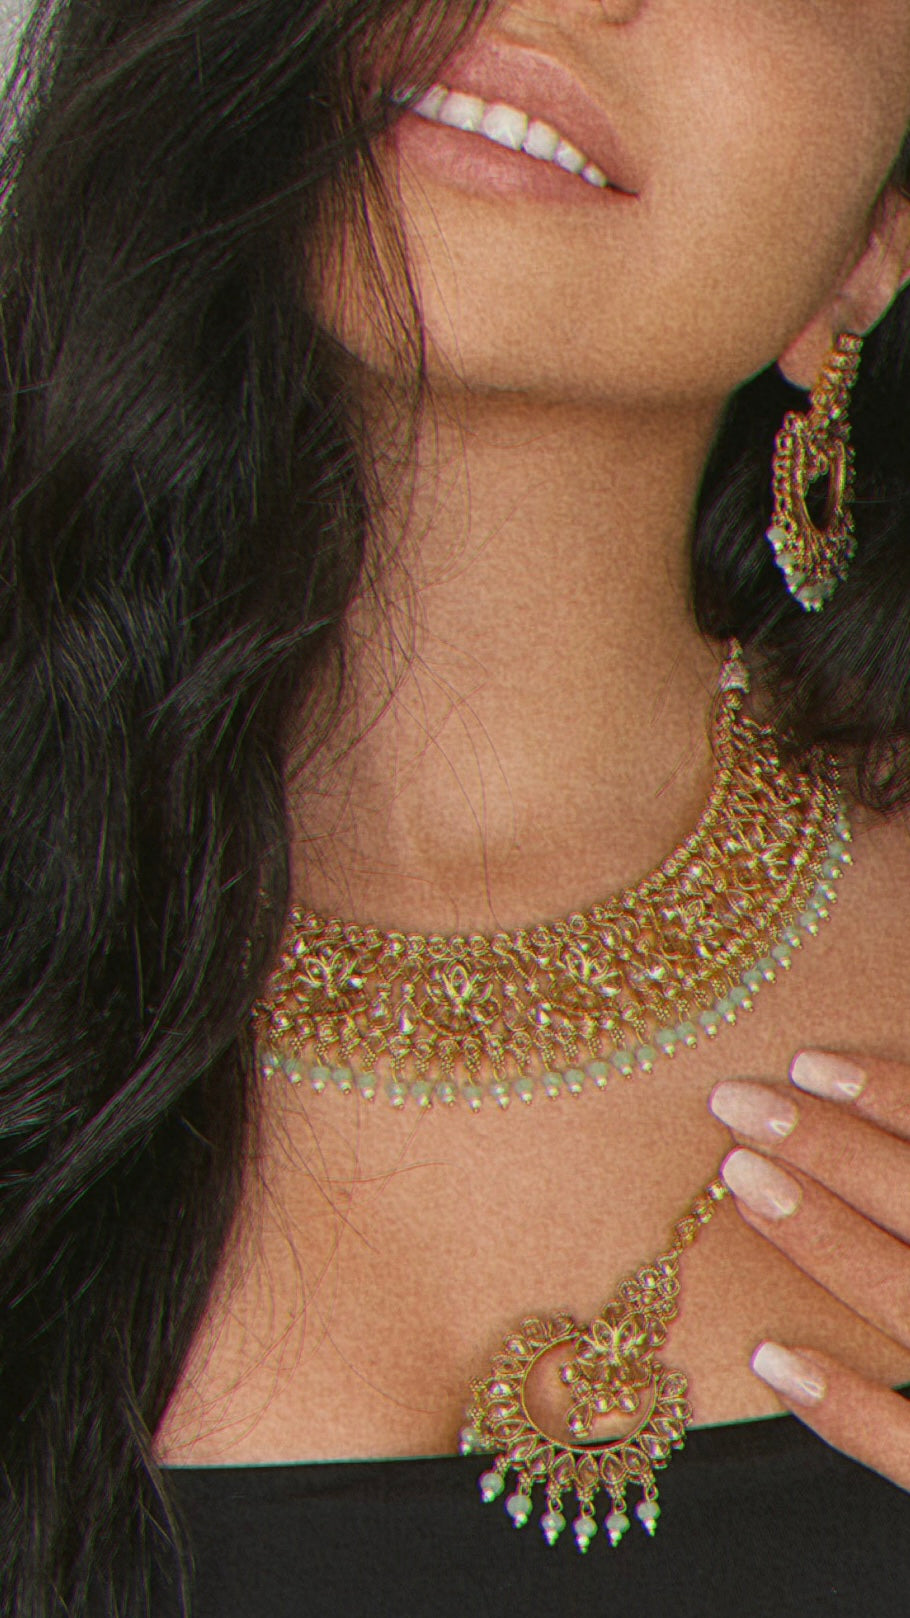 Gold/mint green 3 piece jewelry set- earrings,& bindi covered in clear crystals, mint green beads, & mini pearls